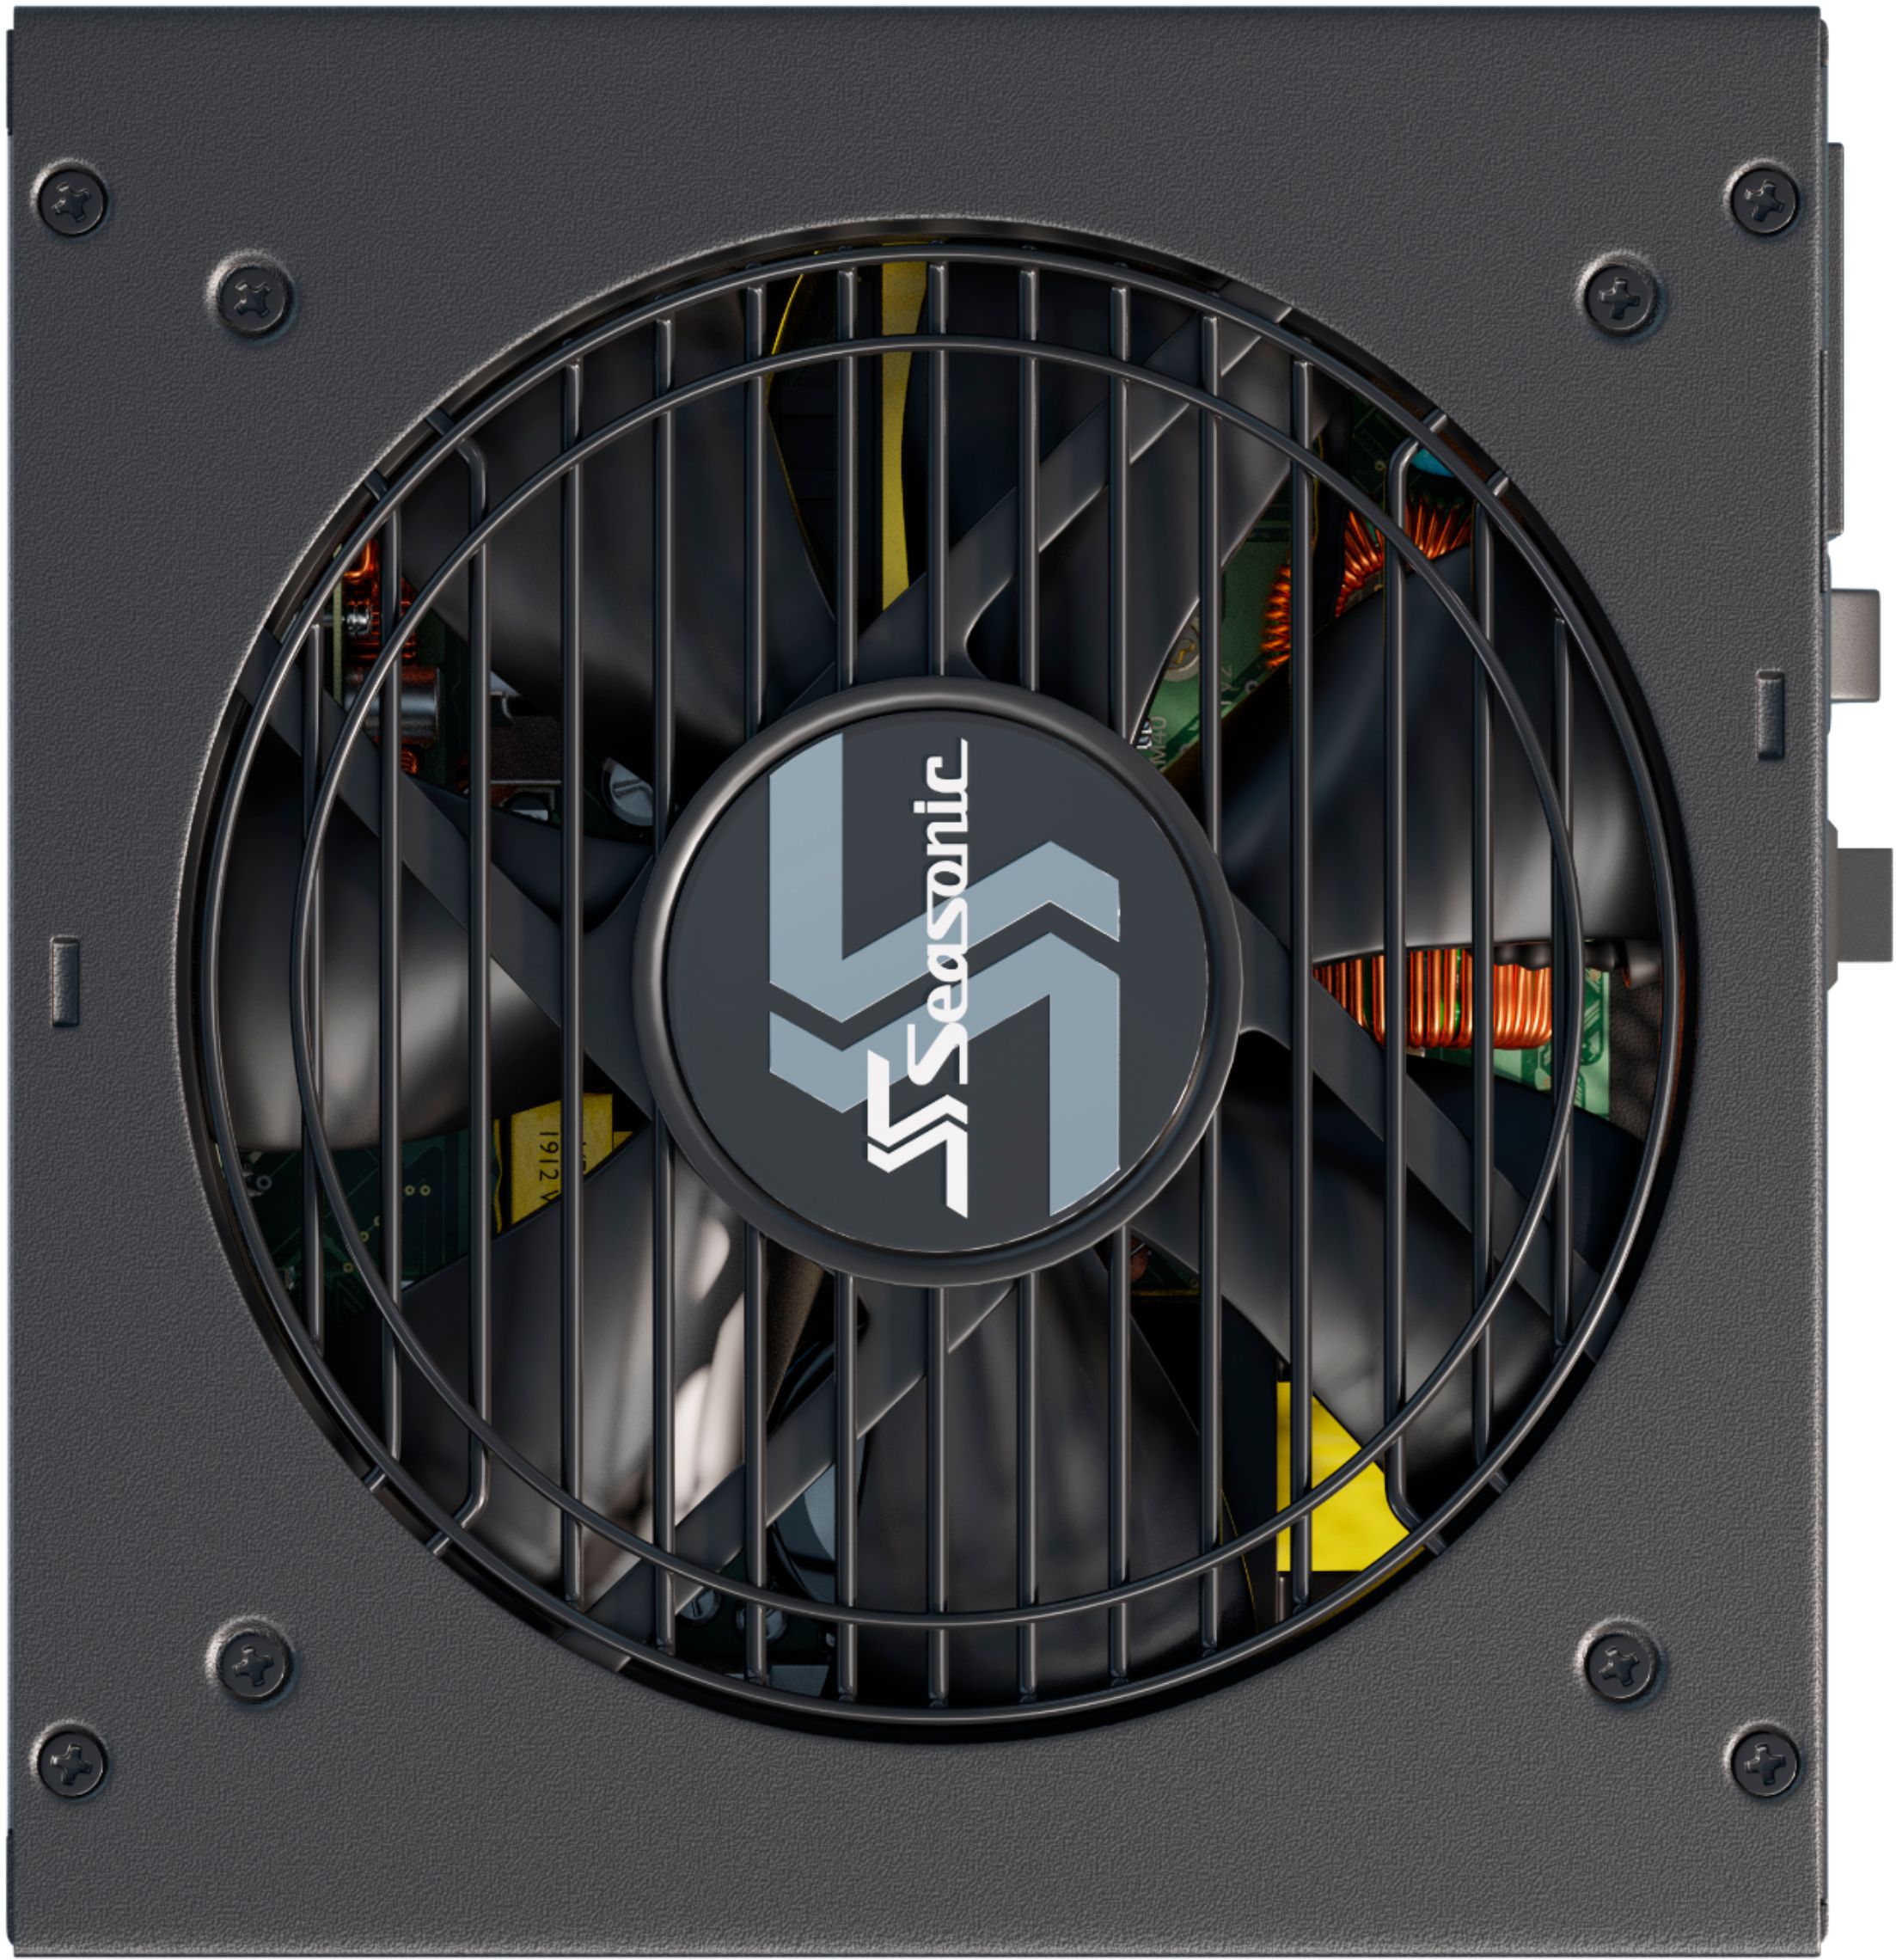  Seasonic FOCUS GX-850, 850W 80+ Gold, Full-Modular, Fan Control  in Fanless, Silent, and Cooling Mode, Perfect Power Supply for Gaming and  Various Application, SSR-850FX. : Electronics